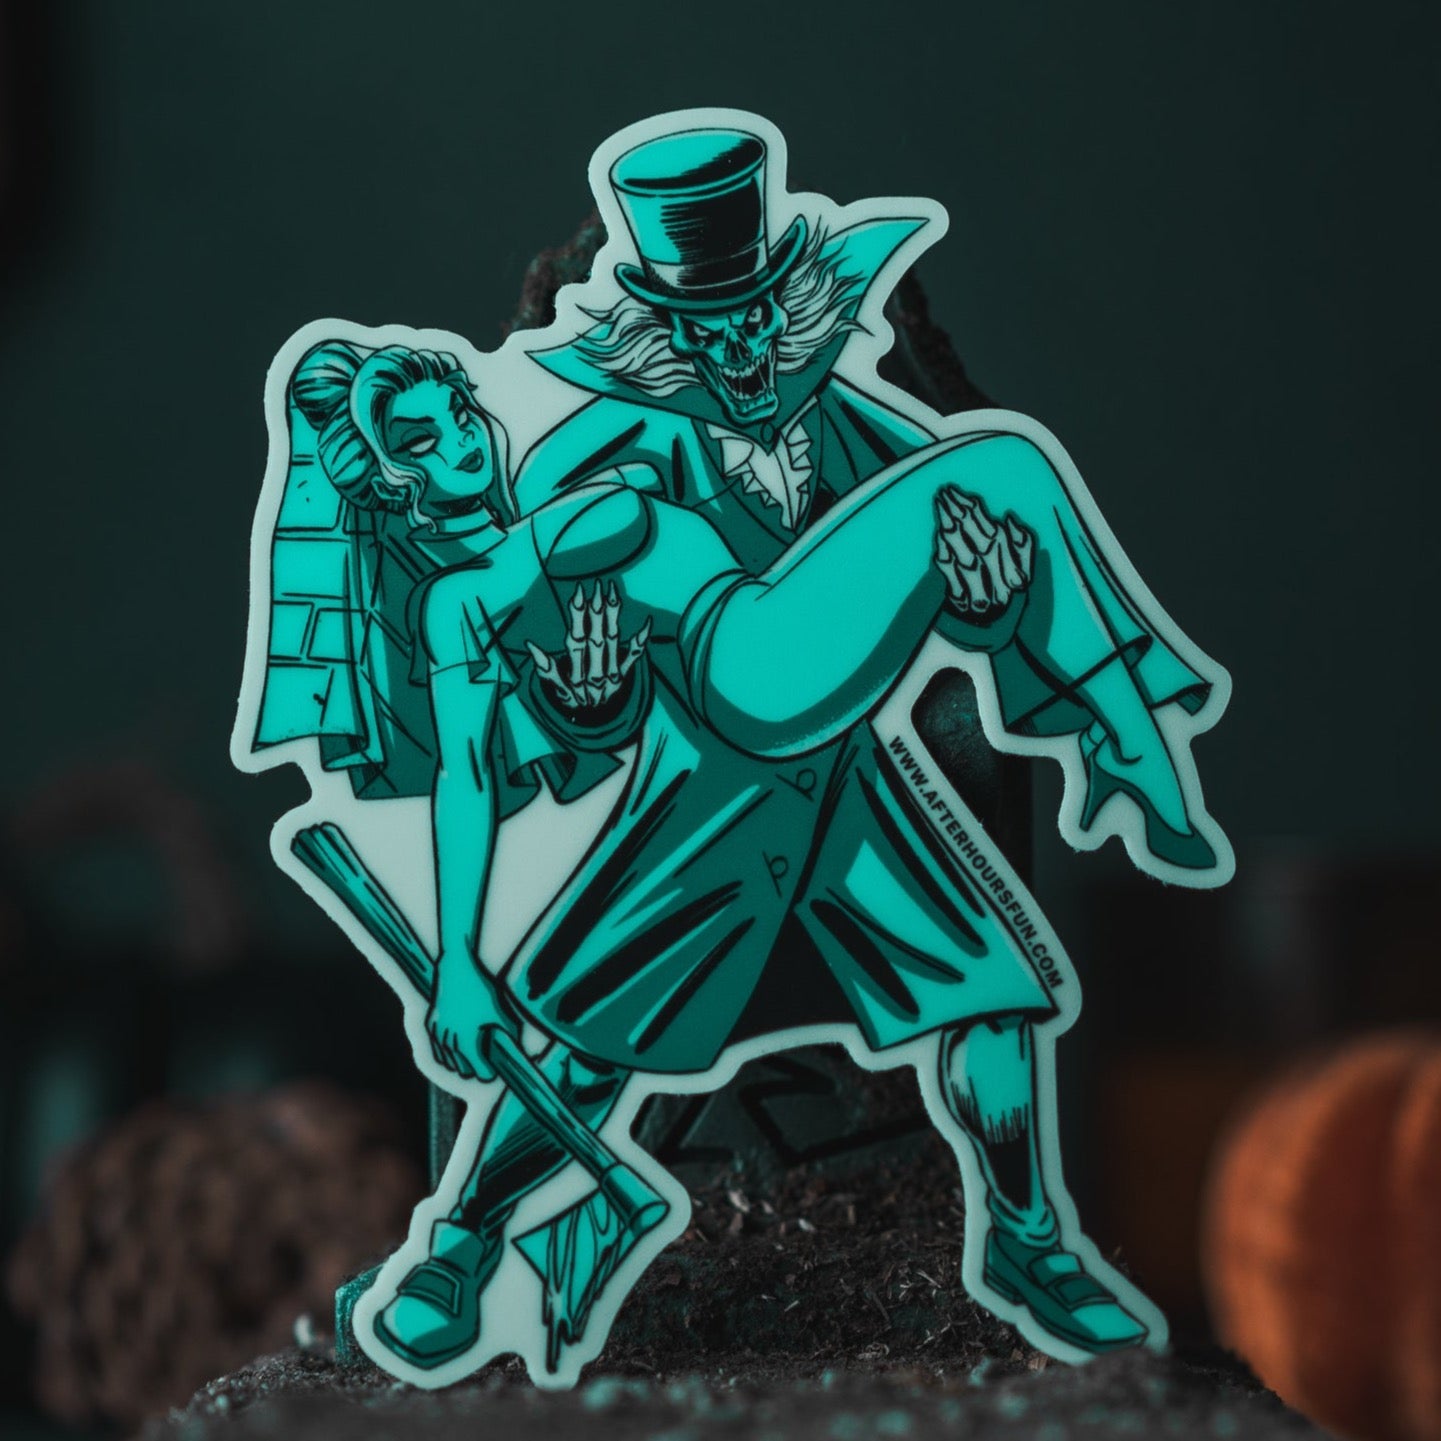  Vision Signs Haunted Mansion Hatbox Ghost Sticker